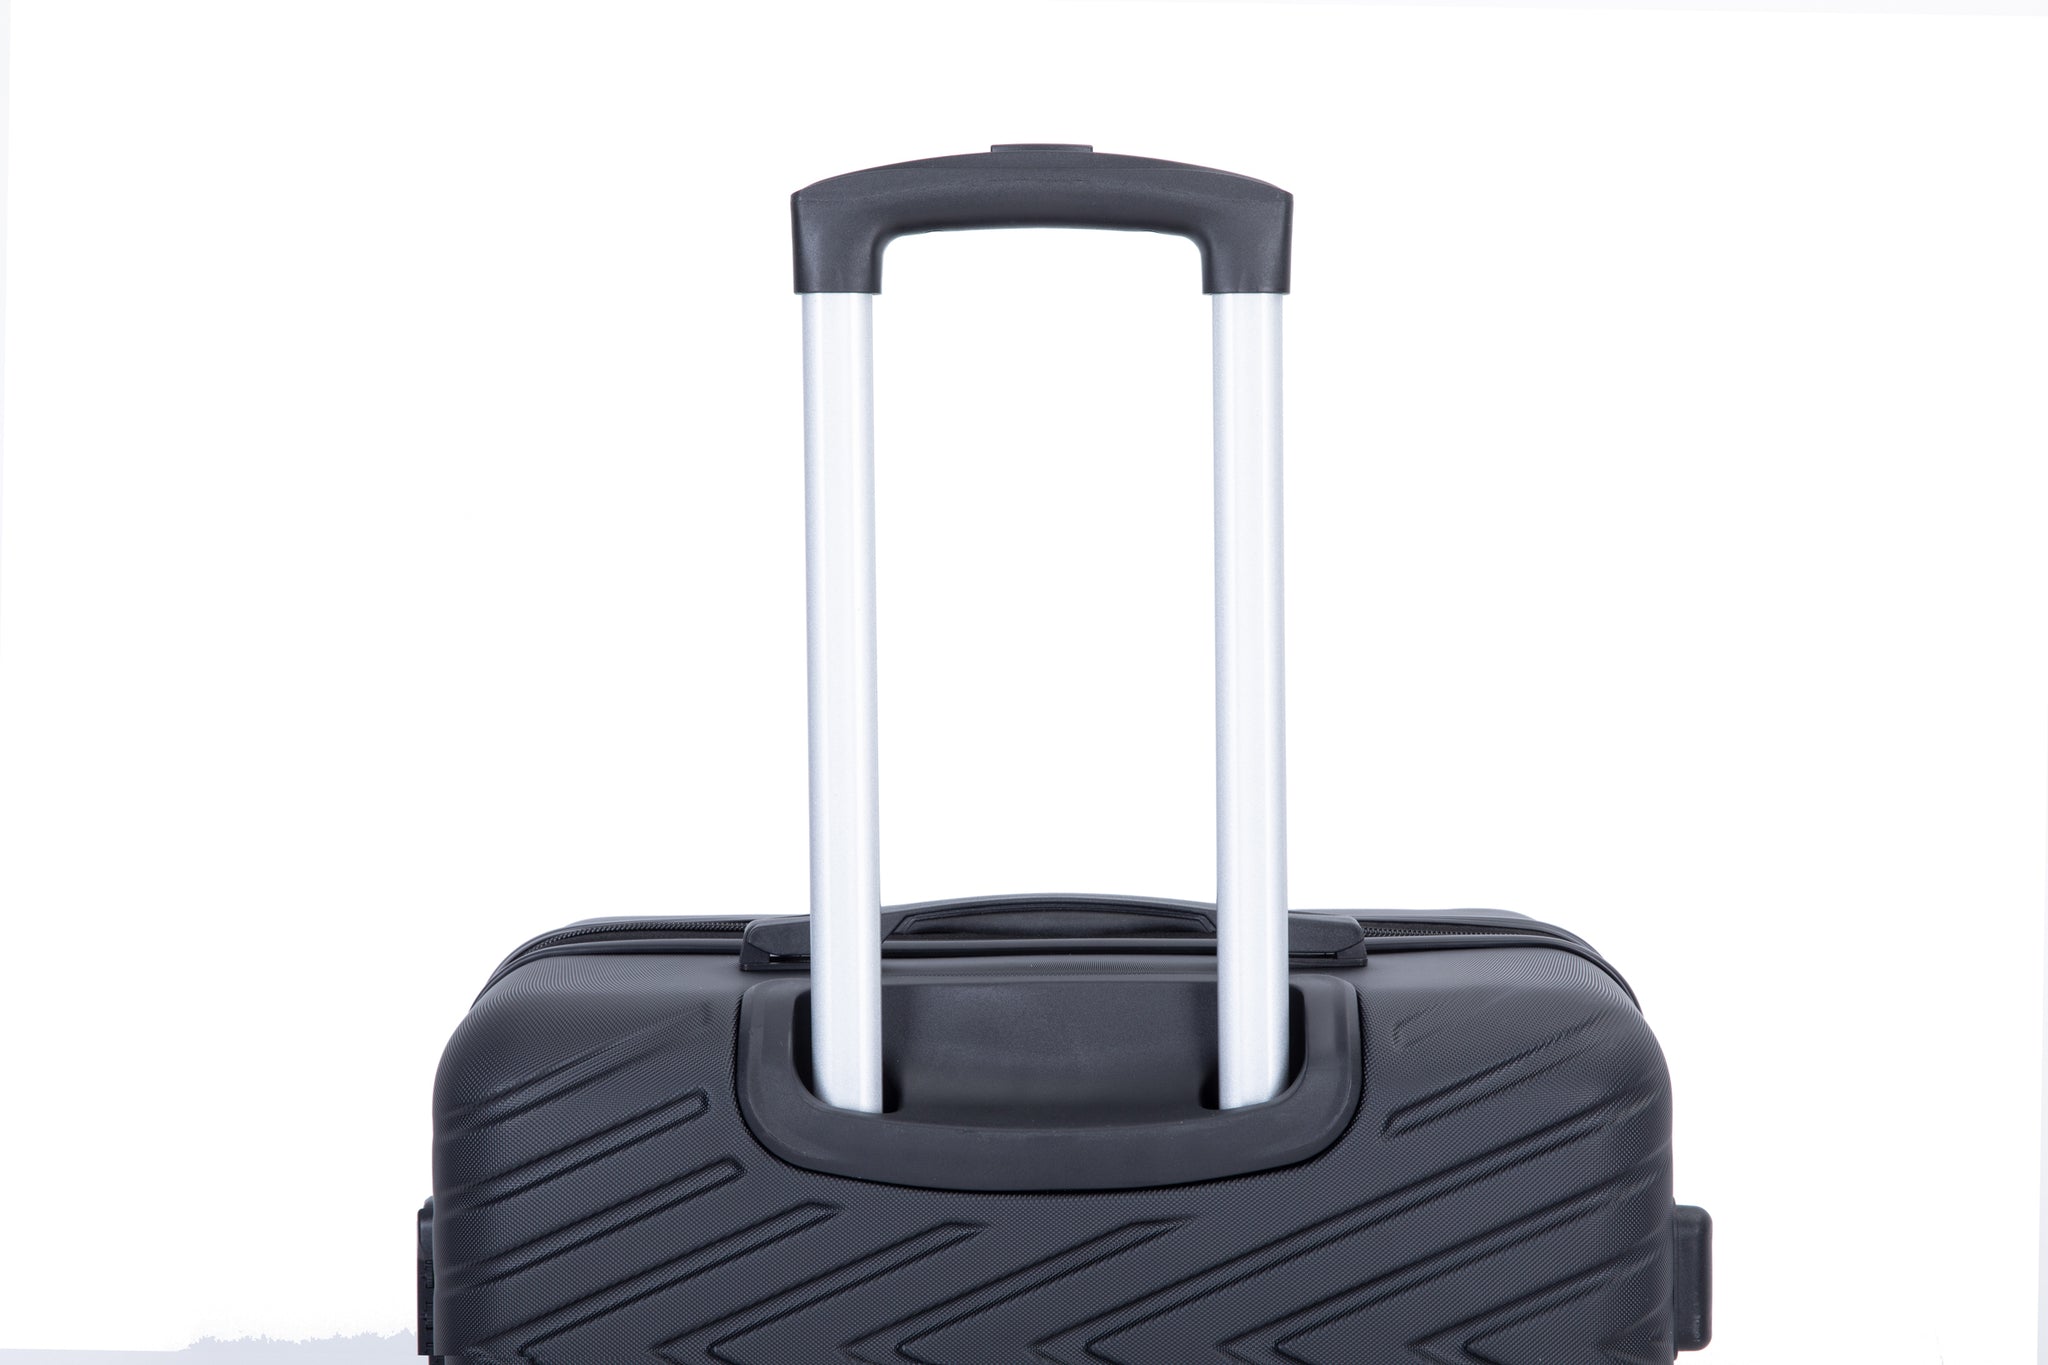 luggage 4 piece ABS lightweight suitcase with rotating black-abs